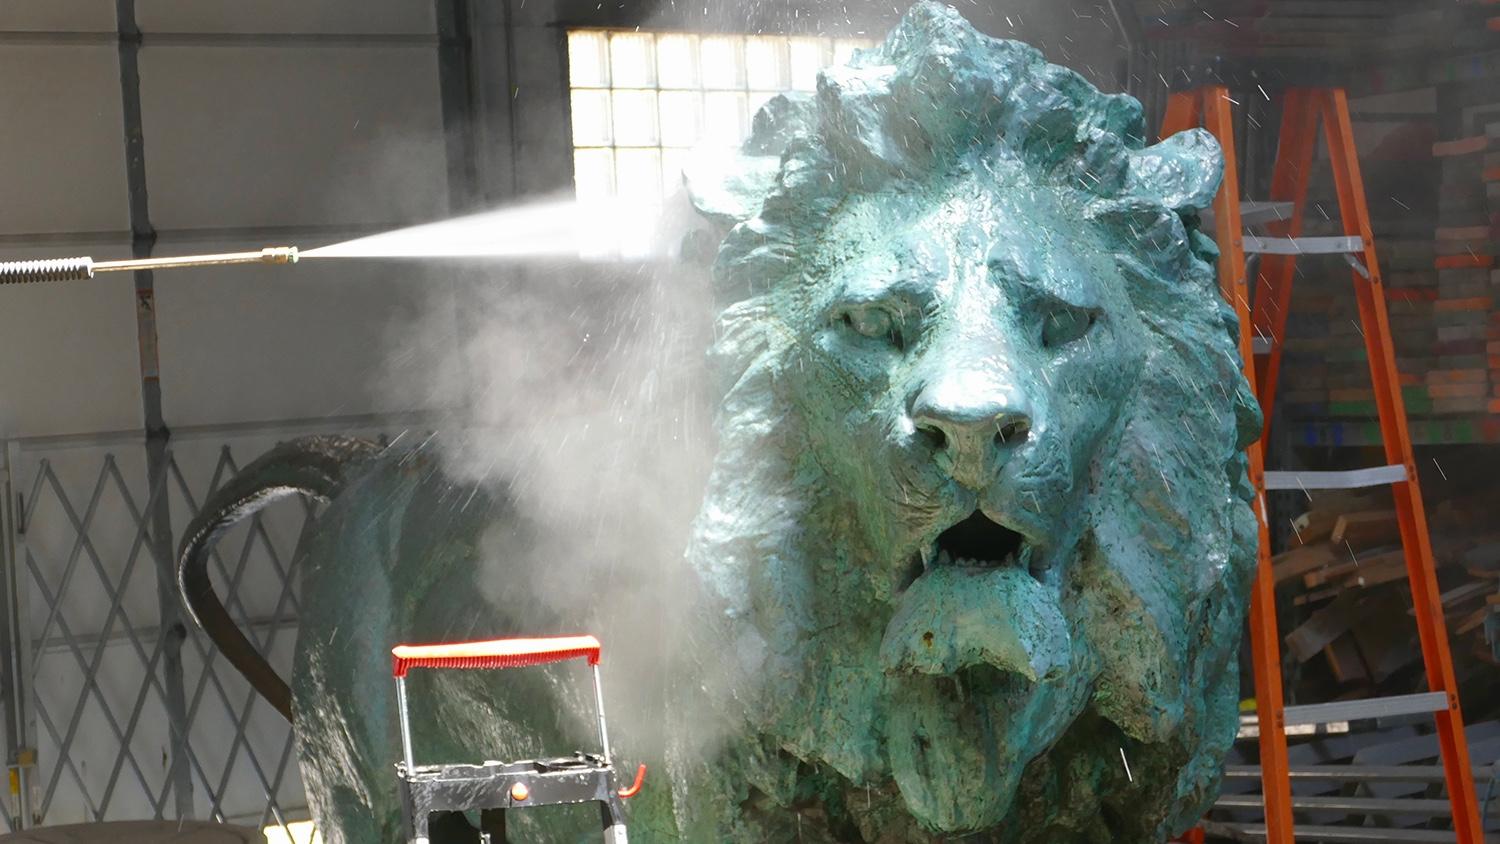 One of the Art Institute’s iconic lions receiving a “spa treatment.” (Courtesy of Art Institute of Chicago)